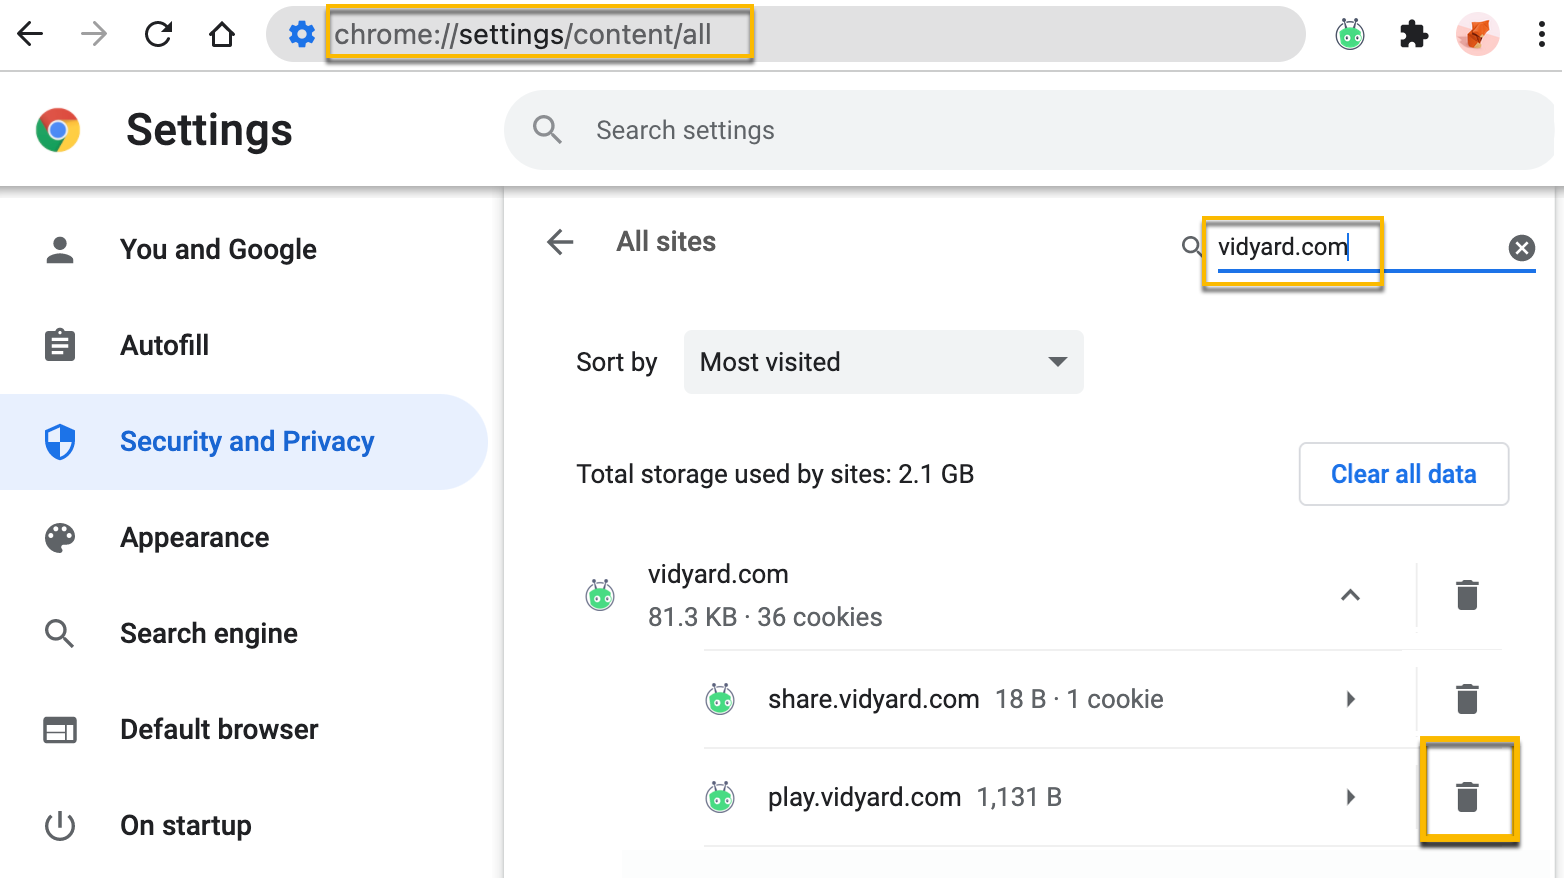 Chrome settings page searched to filter for Vidyard and showing deletable cookie